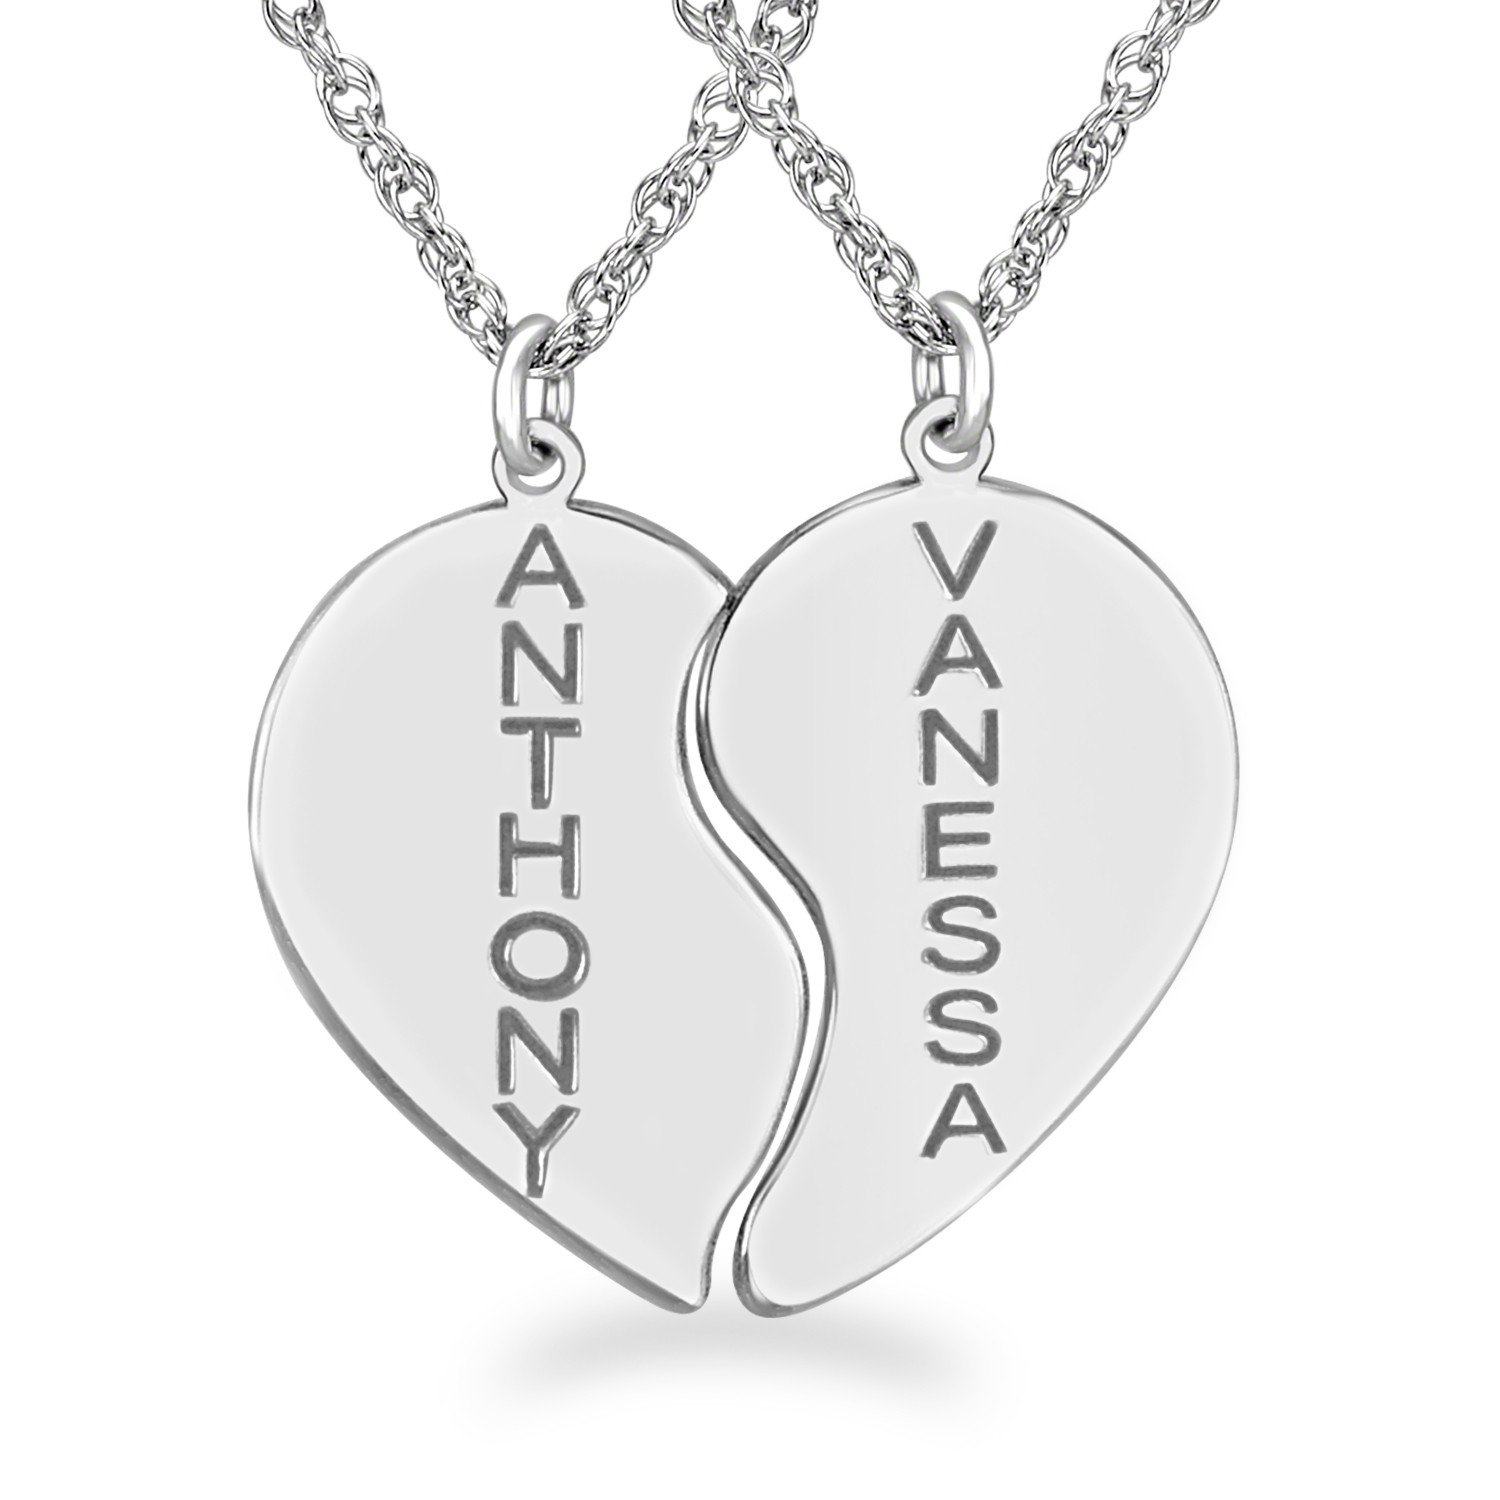 Silver 22 x 25mm Personalized Couples Heart Pendant